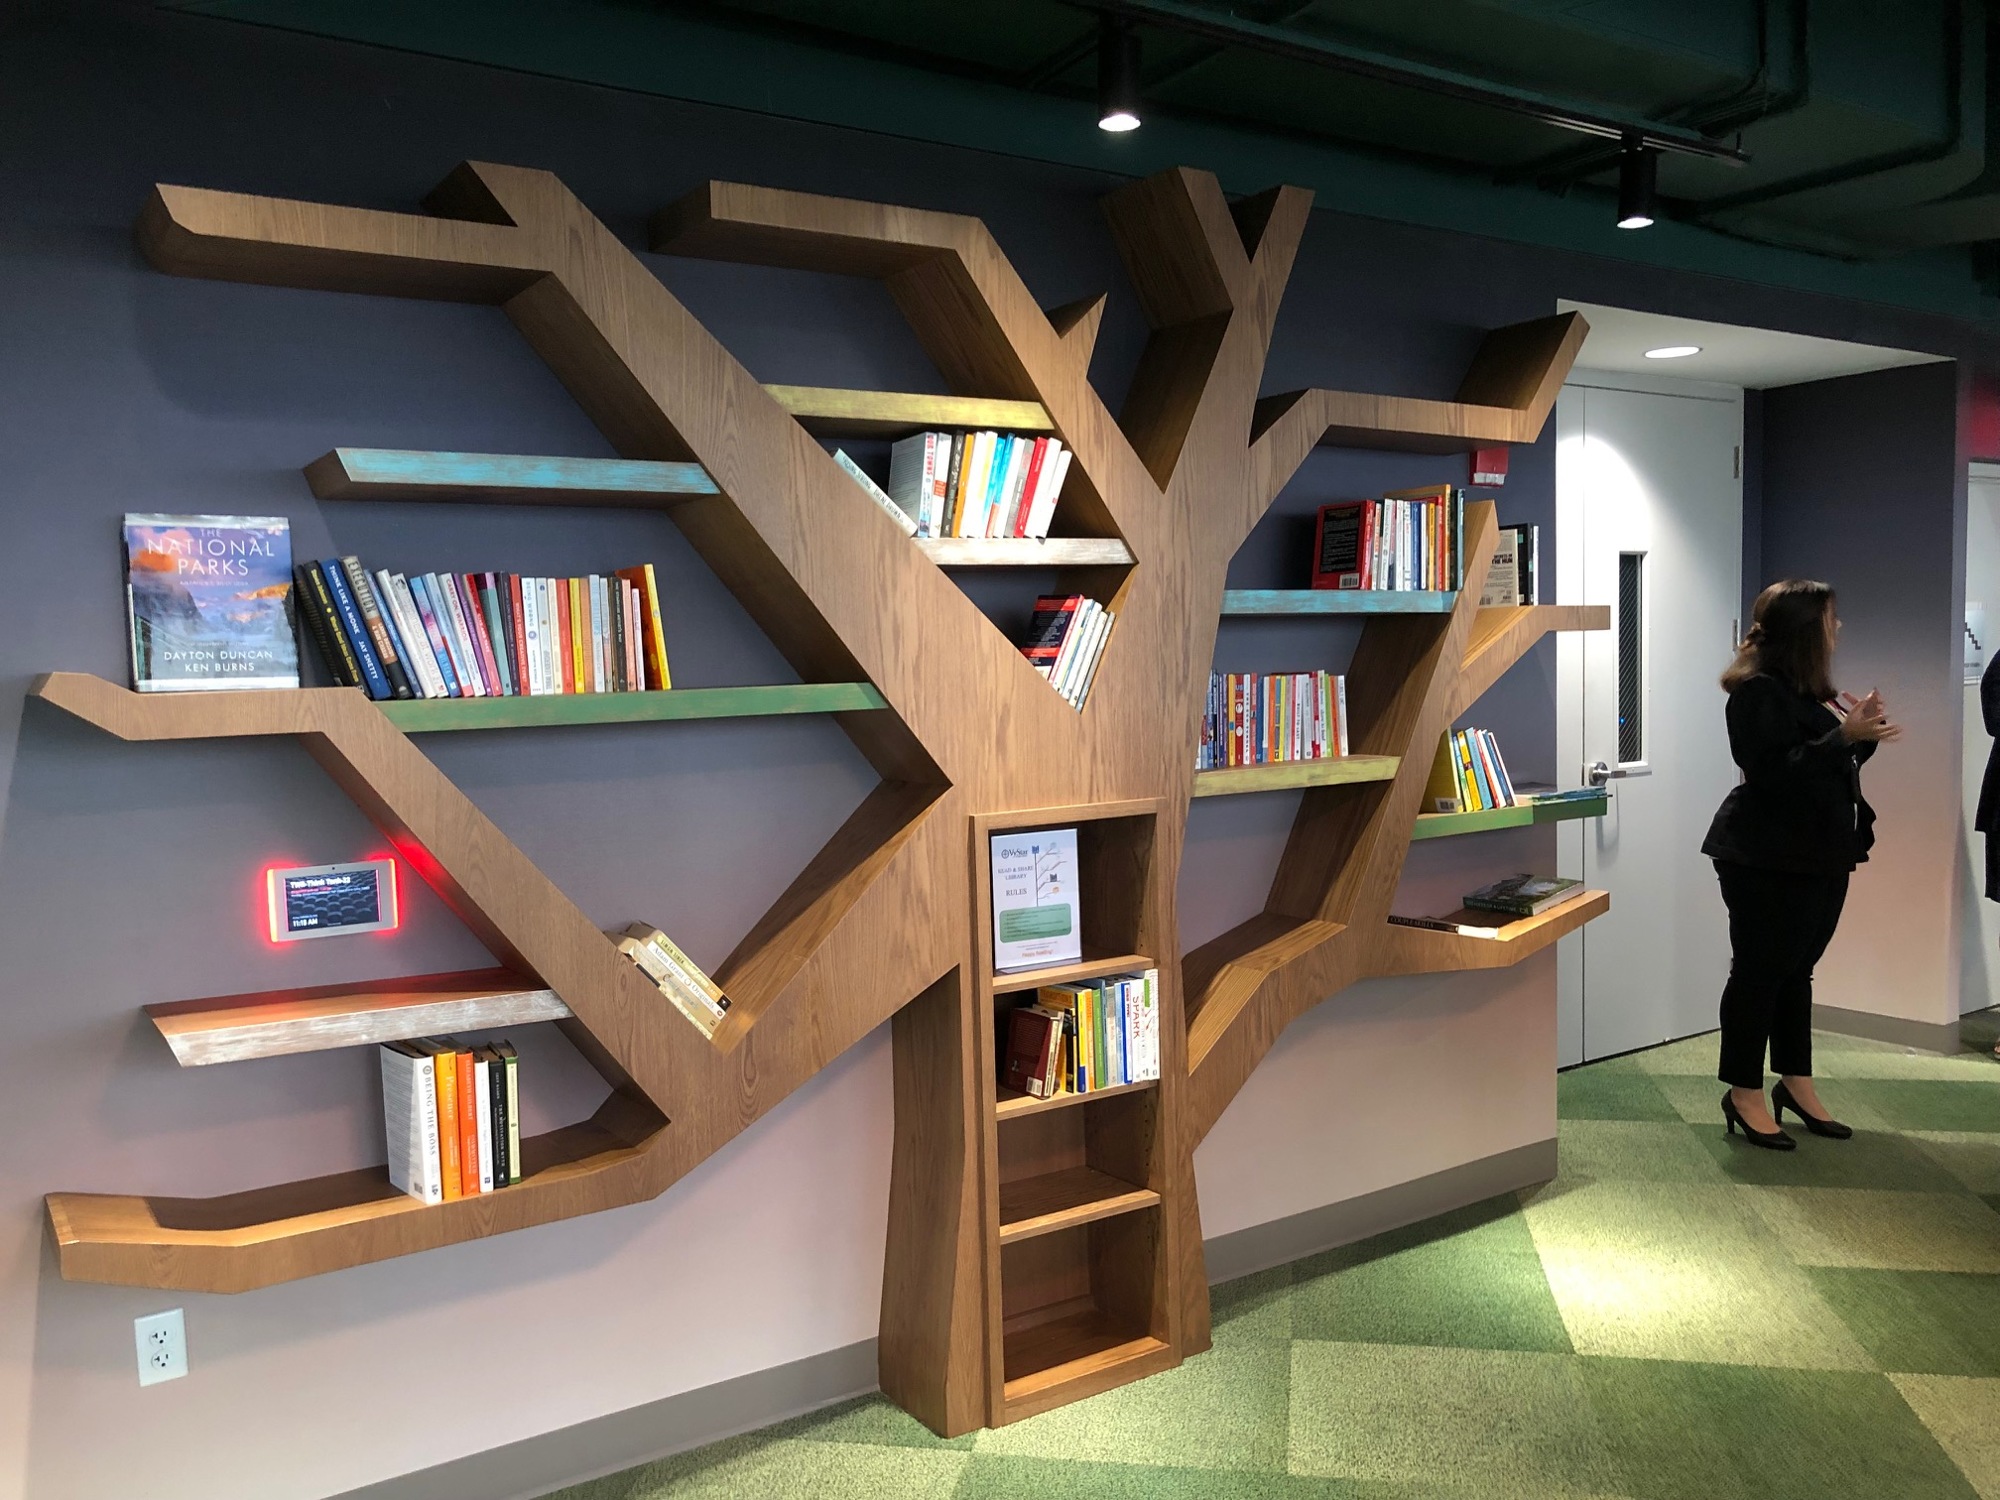 A bookcase designed as a tree features selections from the Jacksonville-based Chamblin’s Uptown.